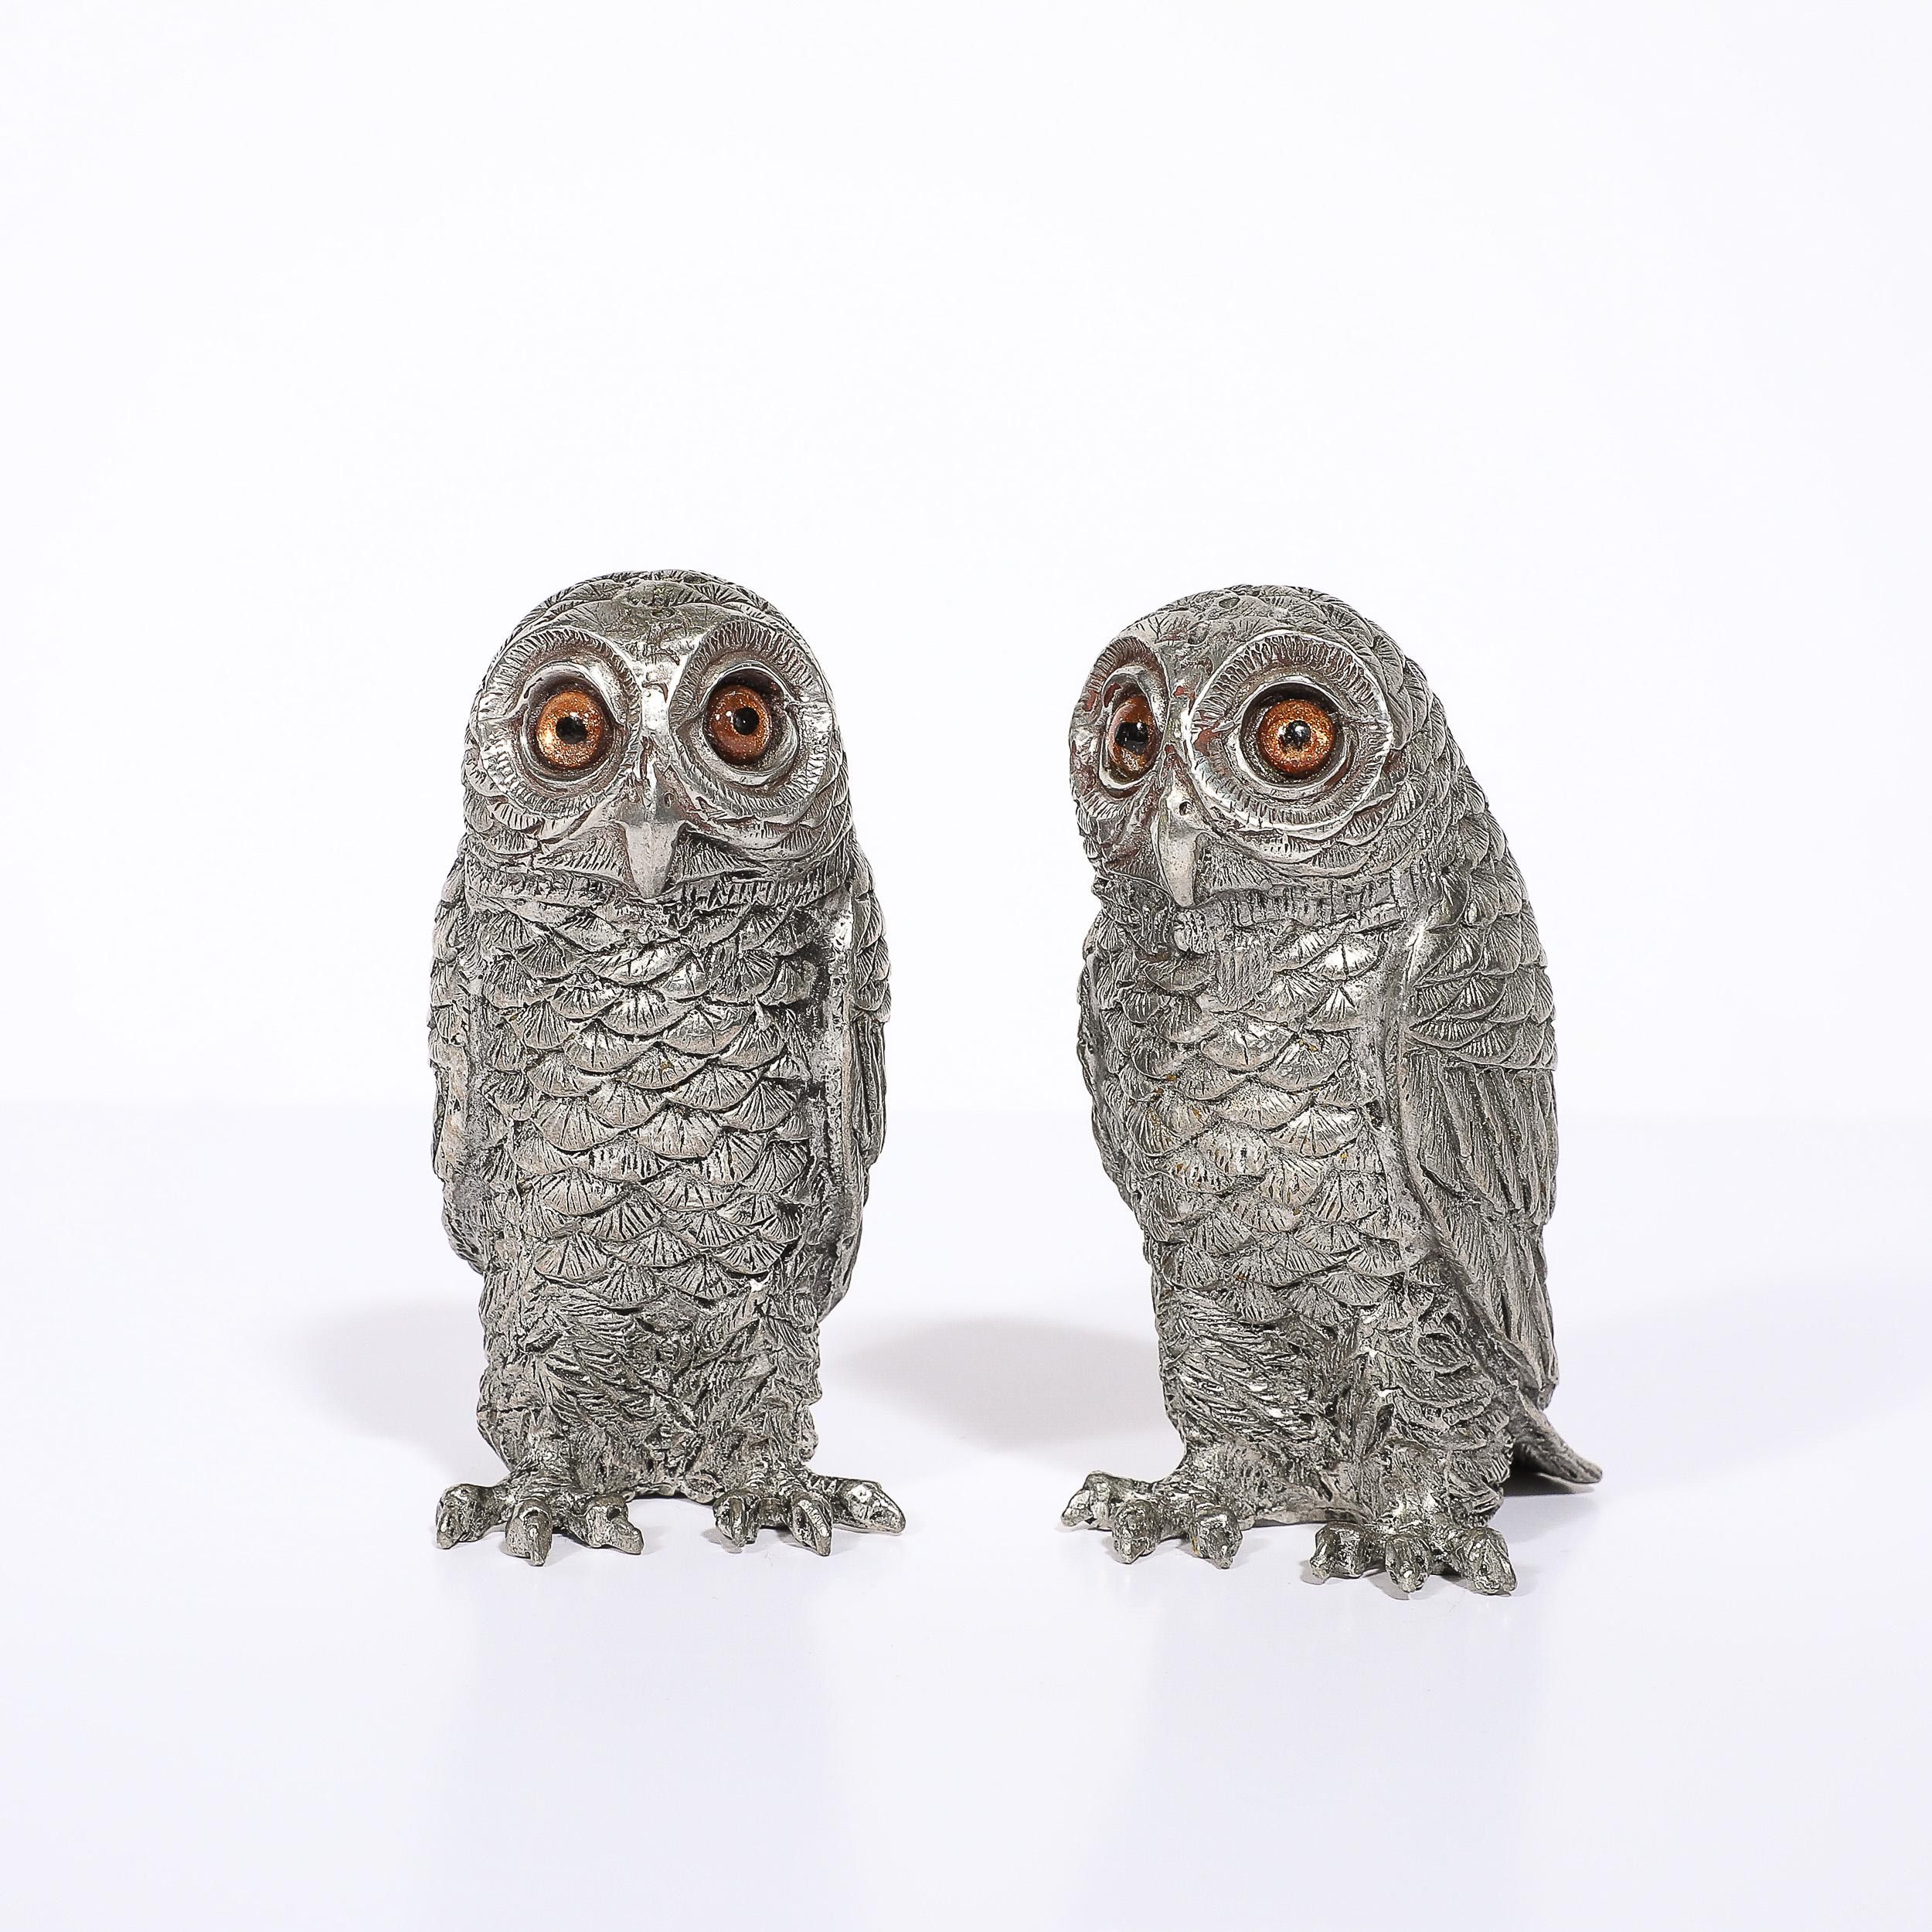 These distinct and playful Modernist Polished Pewter and Amber Glass Owl Salt and Pepper Shakers originate from the United States during the latter half of the 20th Century. Formed in a lovely polished pewter depicting ample detailing of the owls